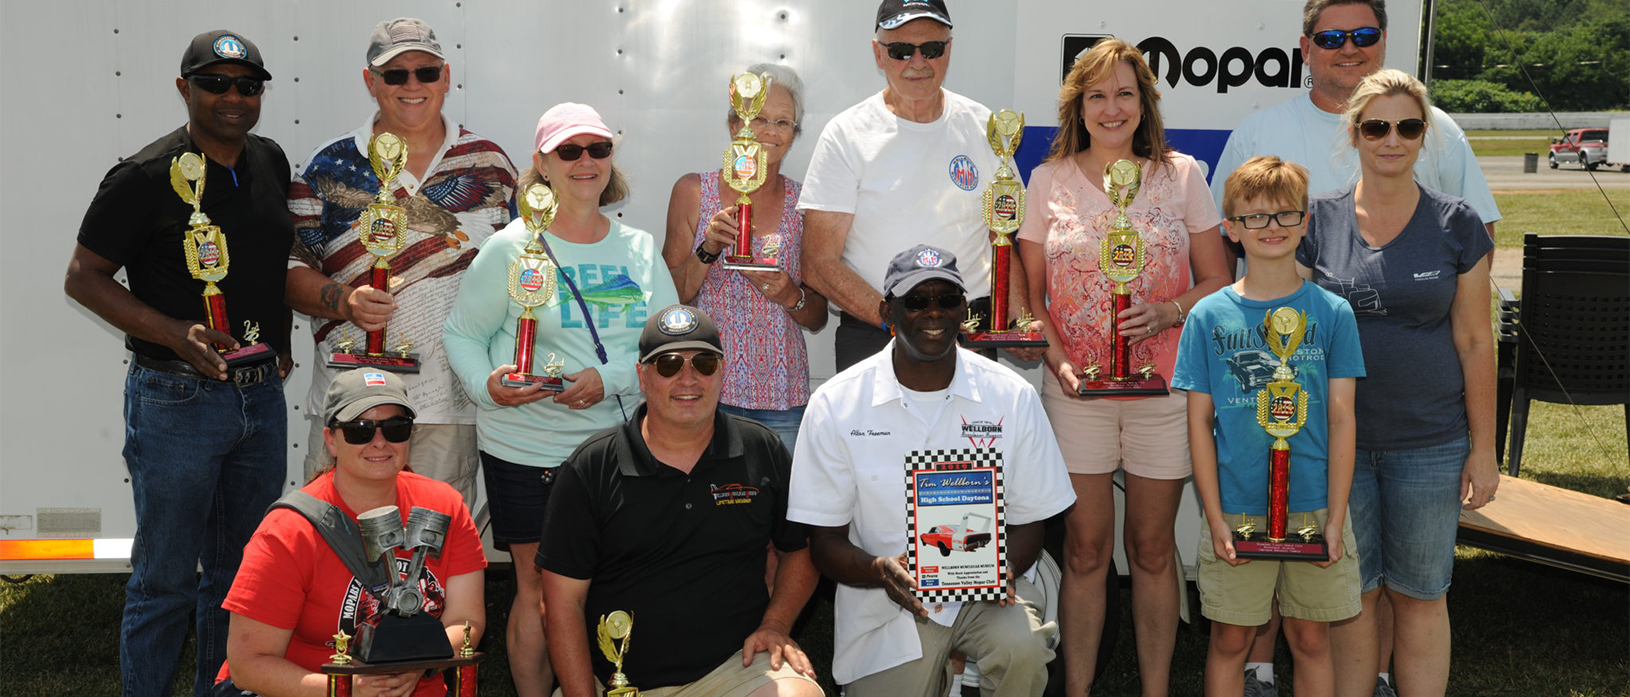 group of people holding trophies